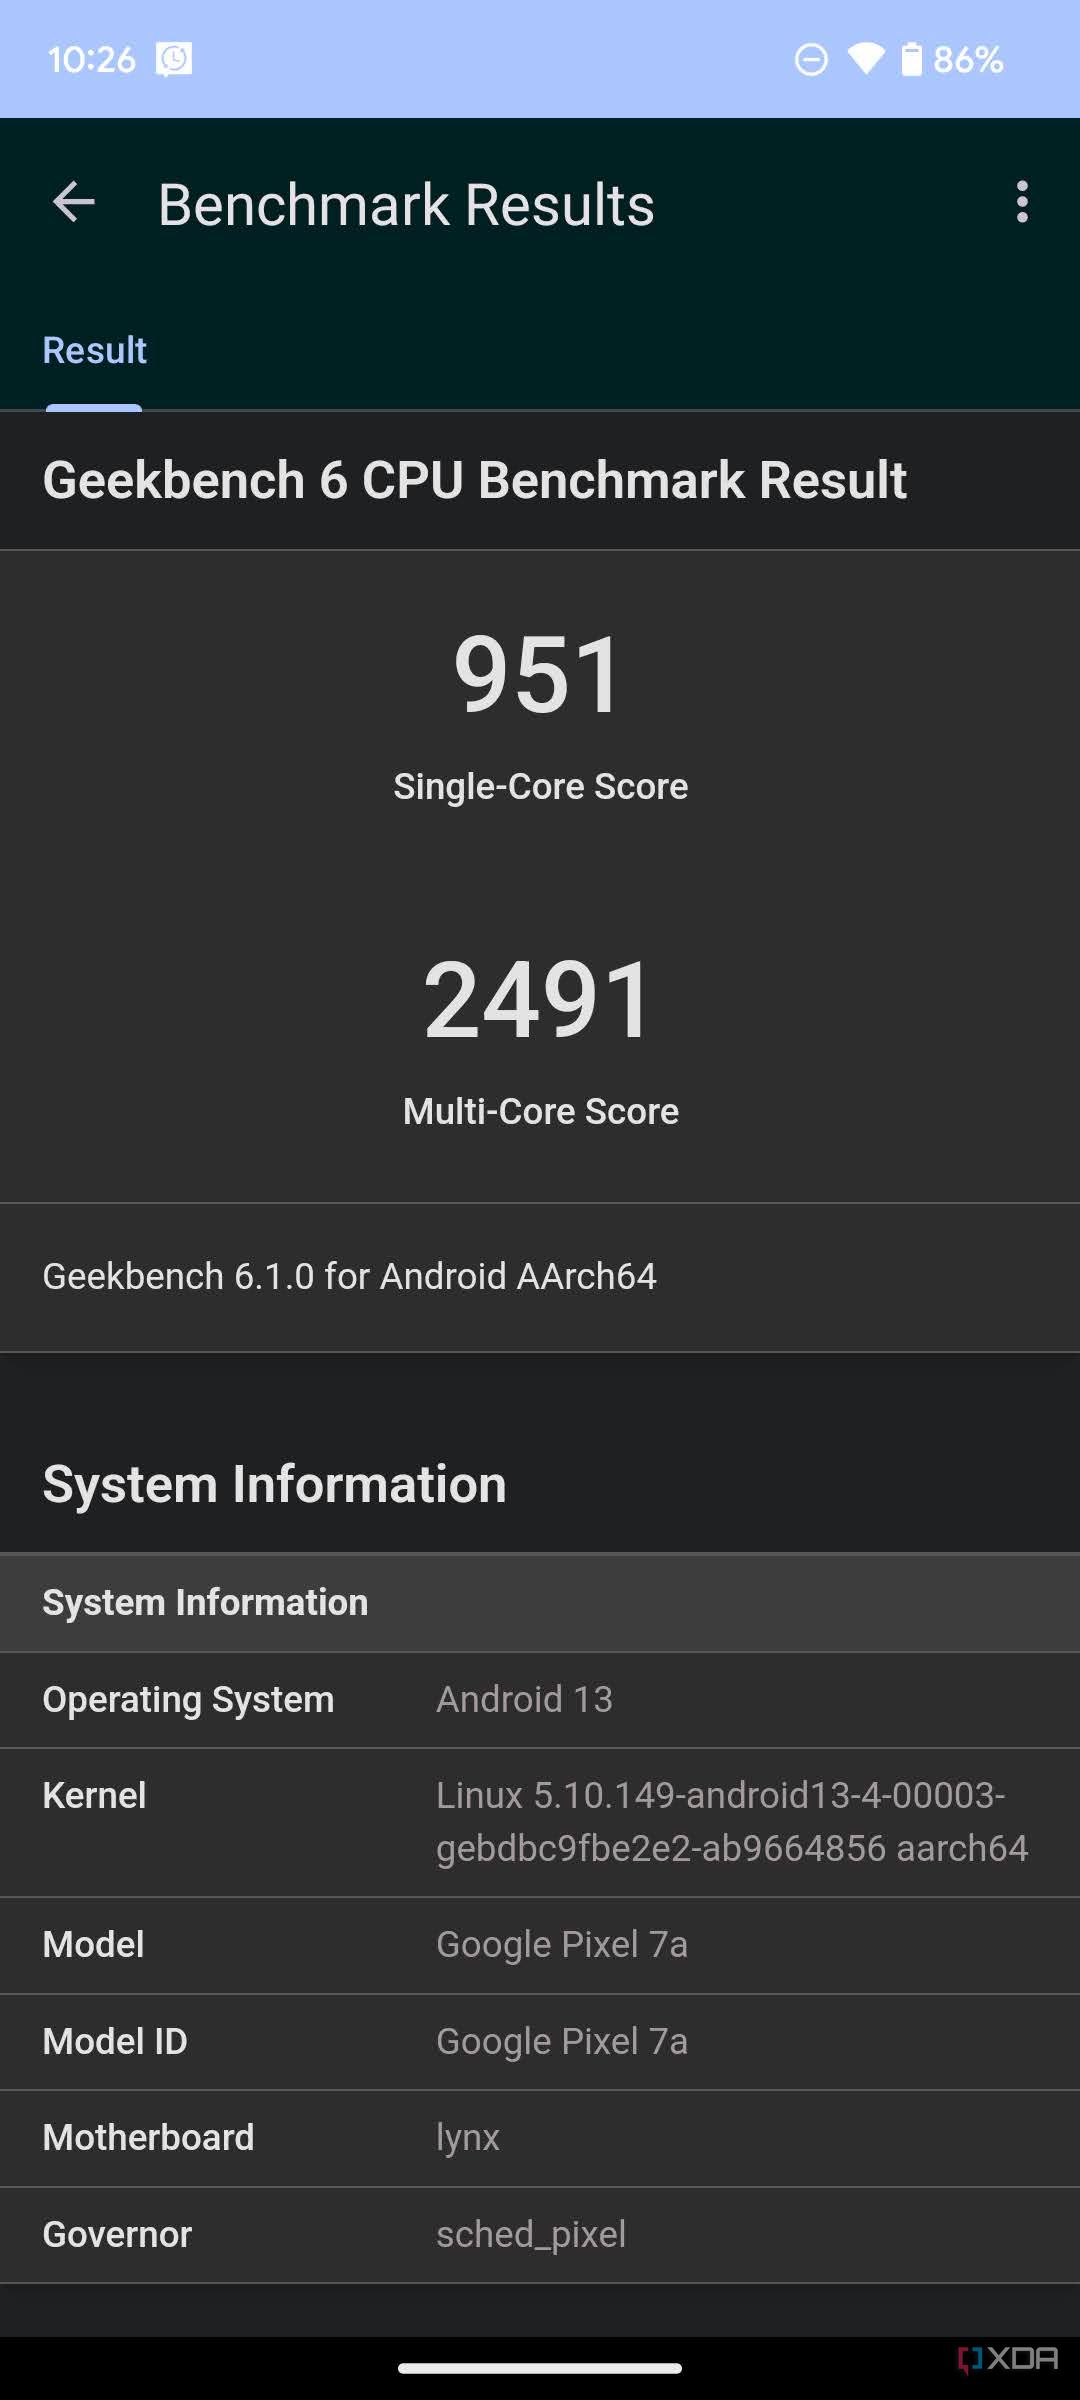 Geekbench 6 results for Google Pixel 7a